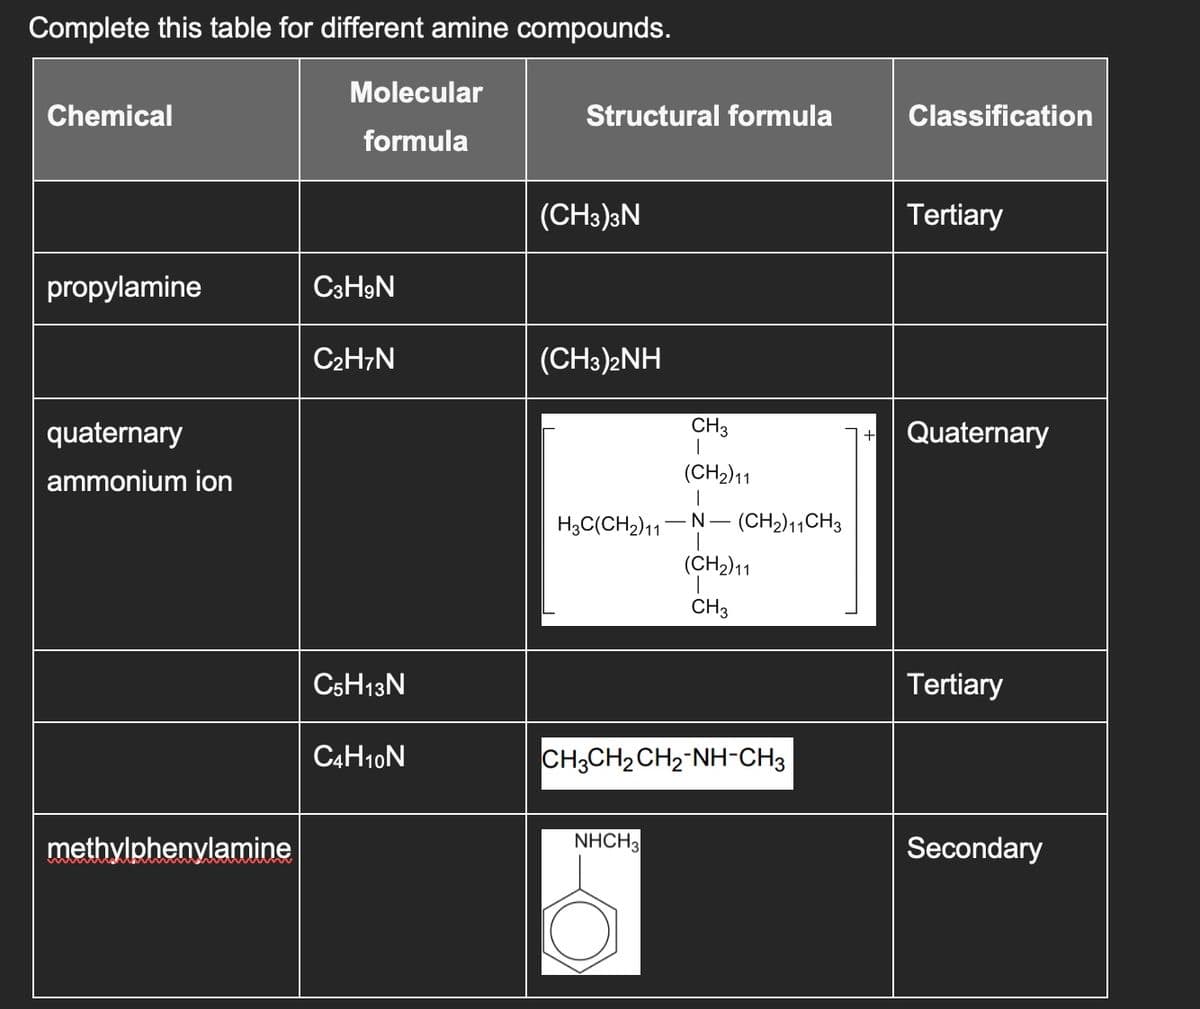 Complete this table for different amine compounds.
Chemical
propylamine
quaternary
ammonium ion
methylphenylamine
Molecular
formula
C3H9N
C₂H7N
C5H13N
C4H10N
Structural formula
(CH3)3N
(CH3)2NH
CH 3
I
(CH₂) 11
|
H3C(CH2) 11 -N-(CH₂)11CH3
NHCH3
(CH₂)11
CH3
CH3CH2CH2-NH-CH3
+
Classification
Tertiary
Quaternary
Tertiary
Secondary